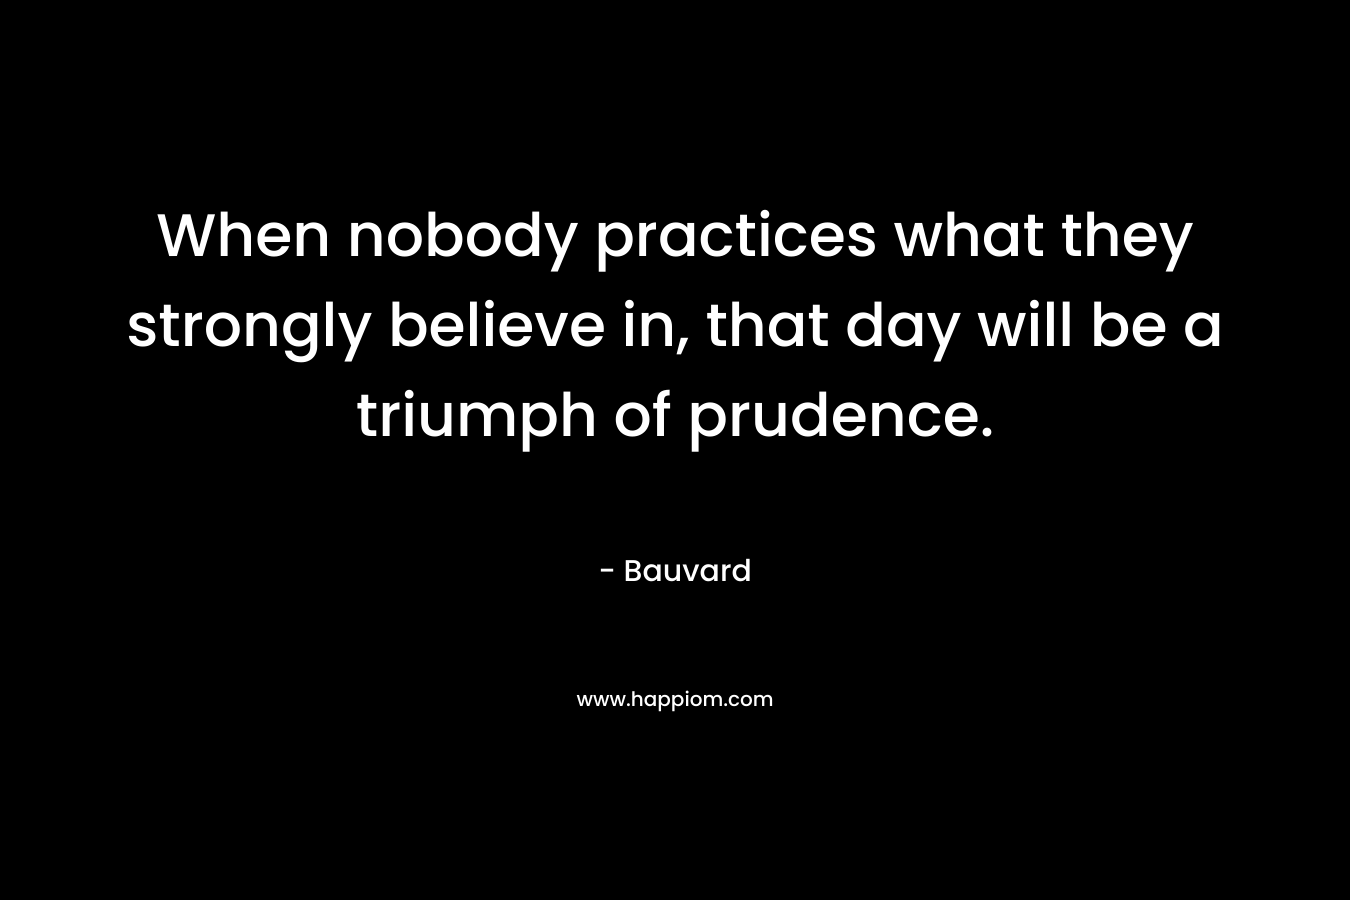 When nobody practices what they strongly believe in, that day will be a triumph of prudence.